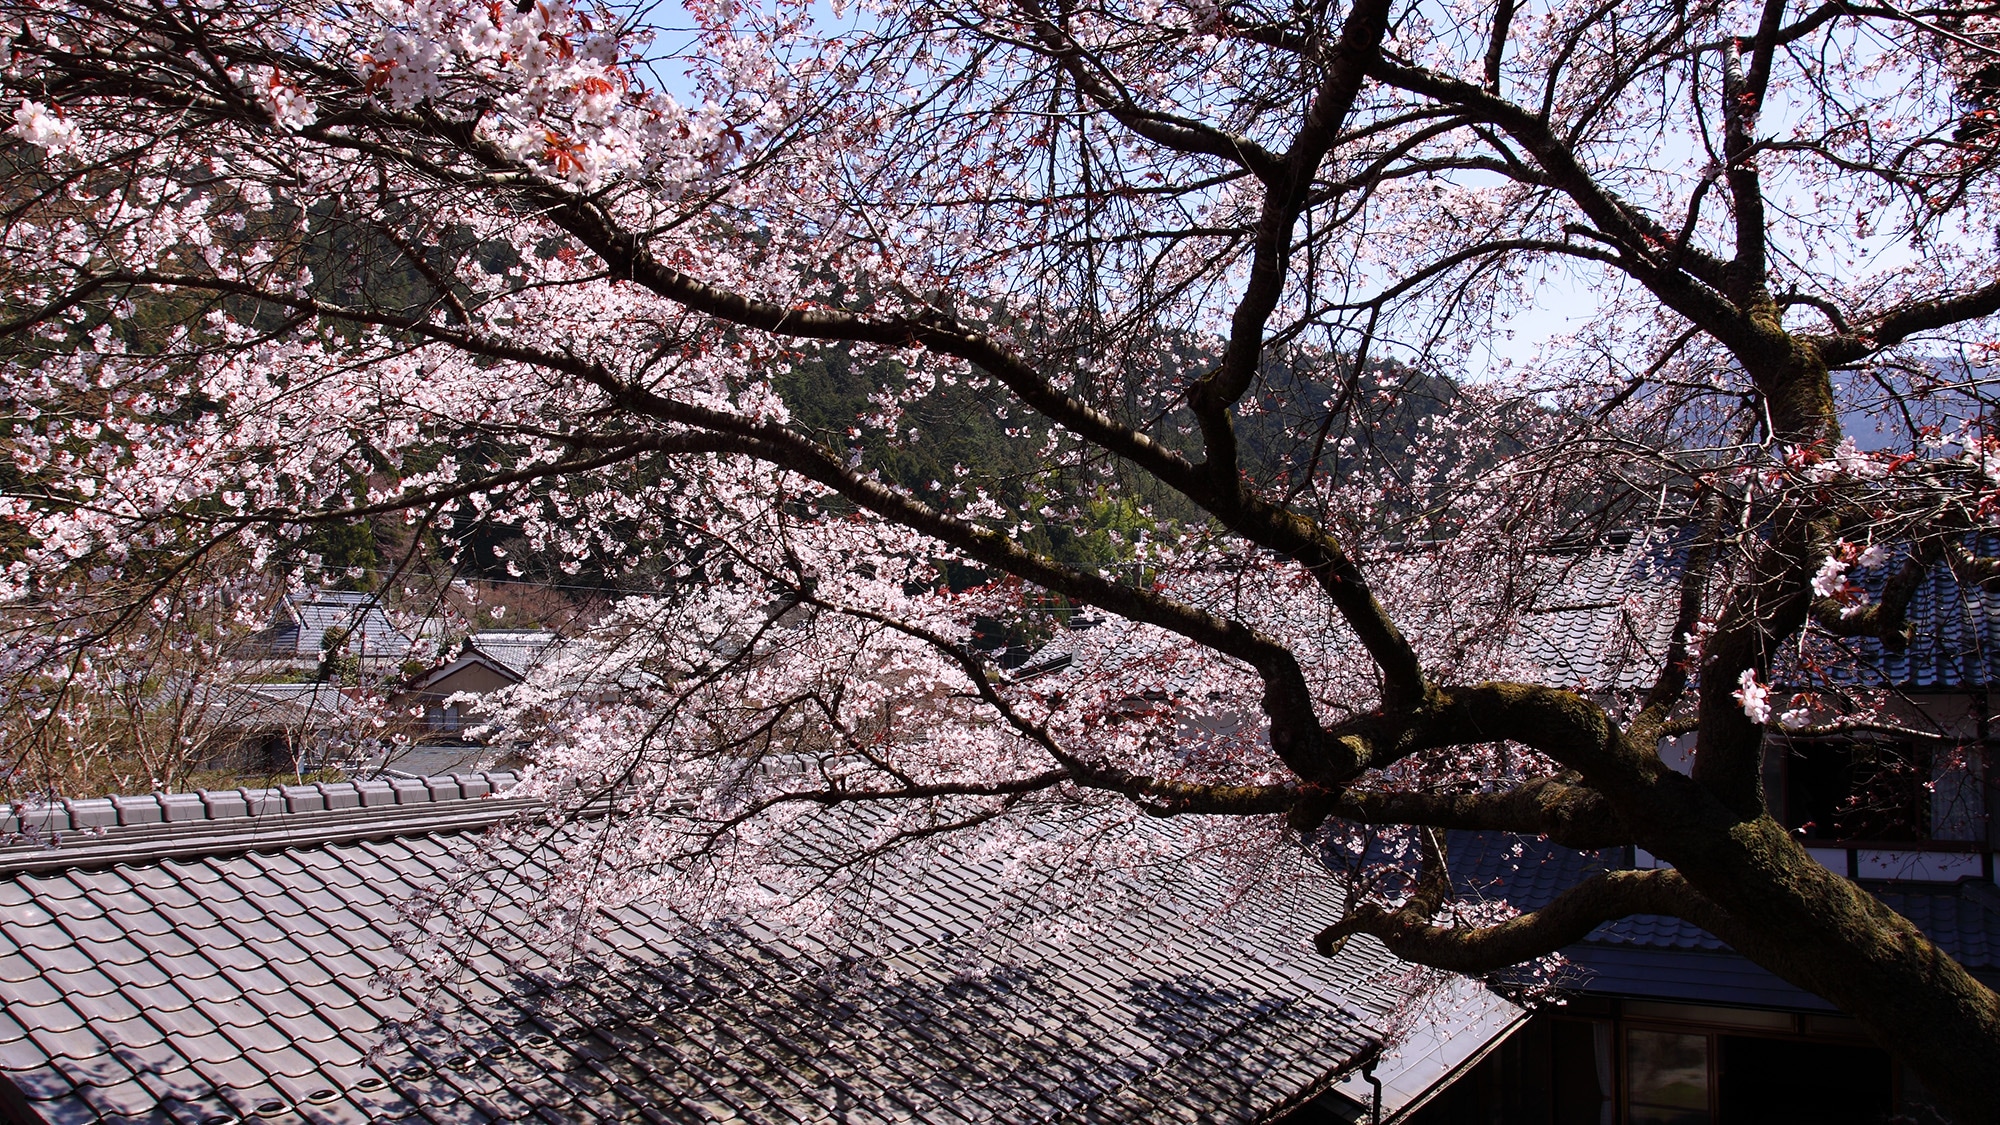 * [Courtyard] Cherry trees are also planted in the courtyard.